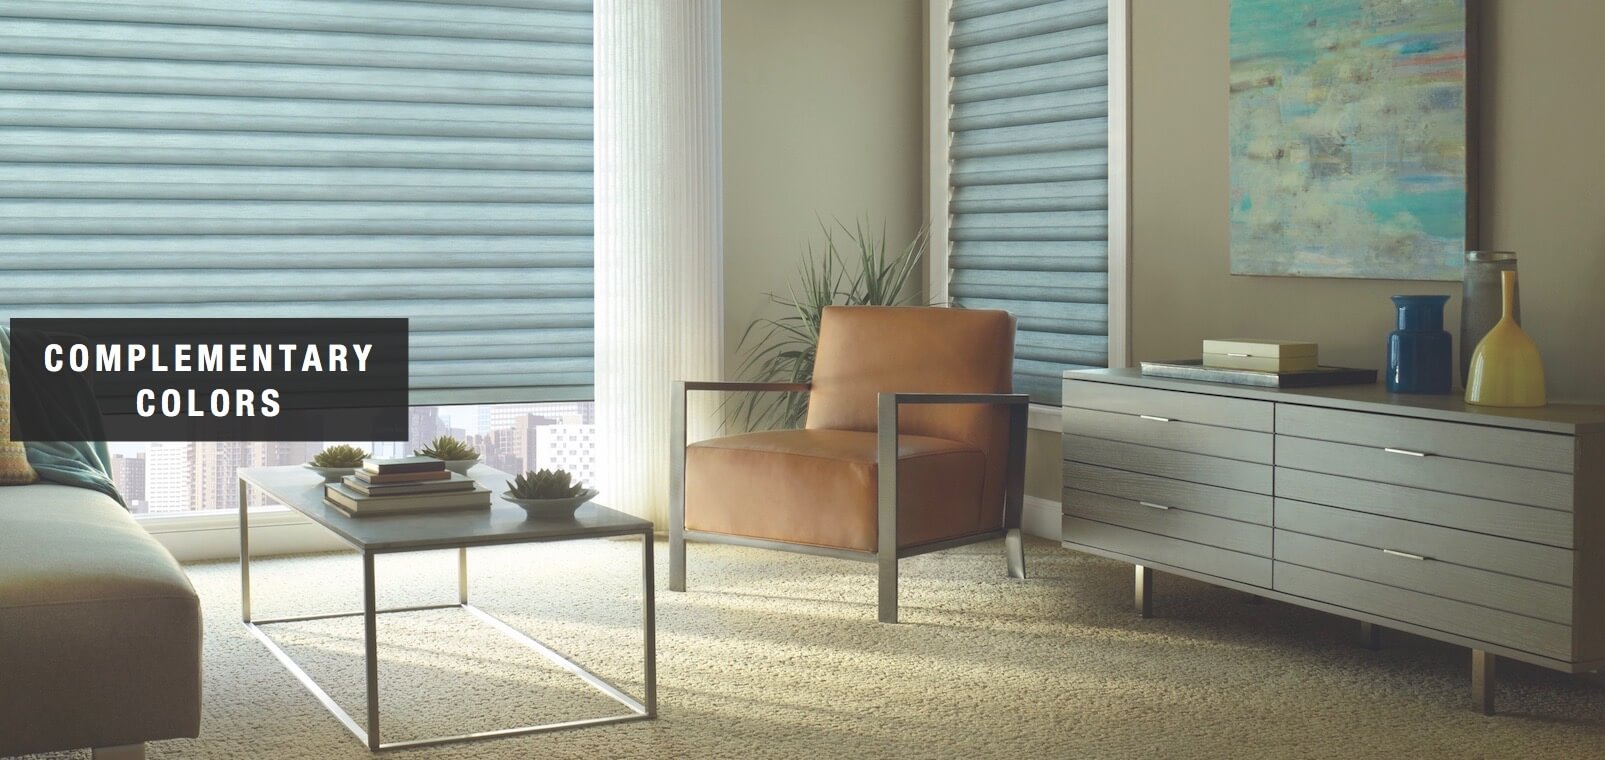 Opposite colors attract and add energy. Shown with Solera® Soft Shades.